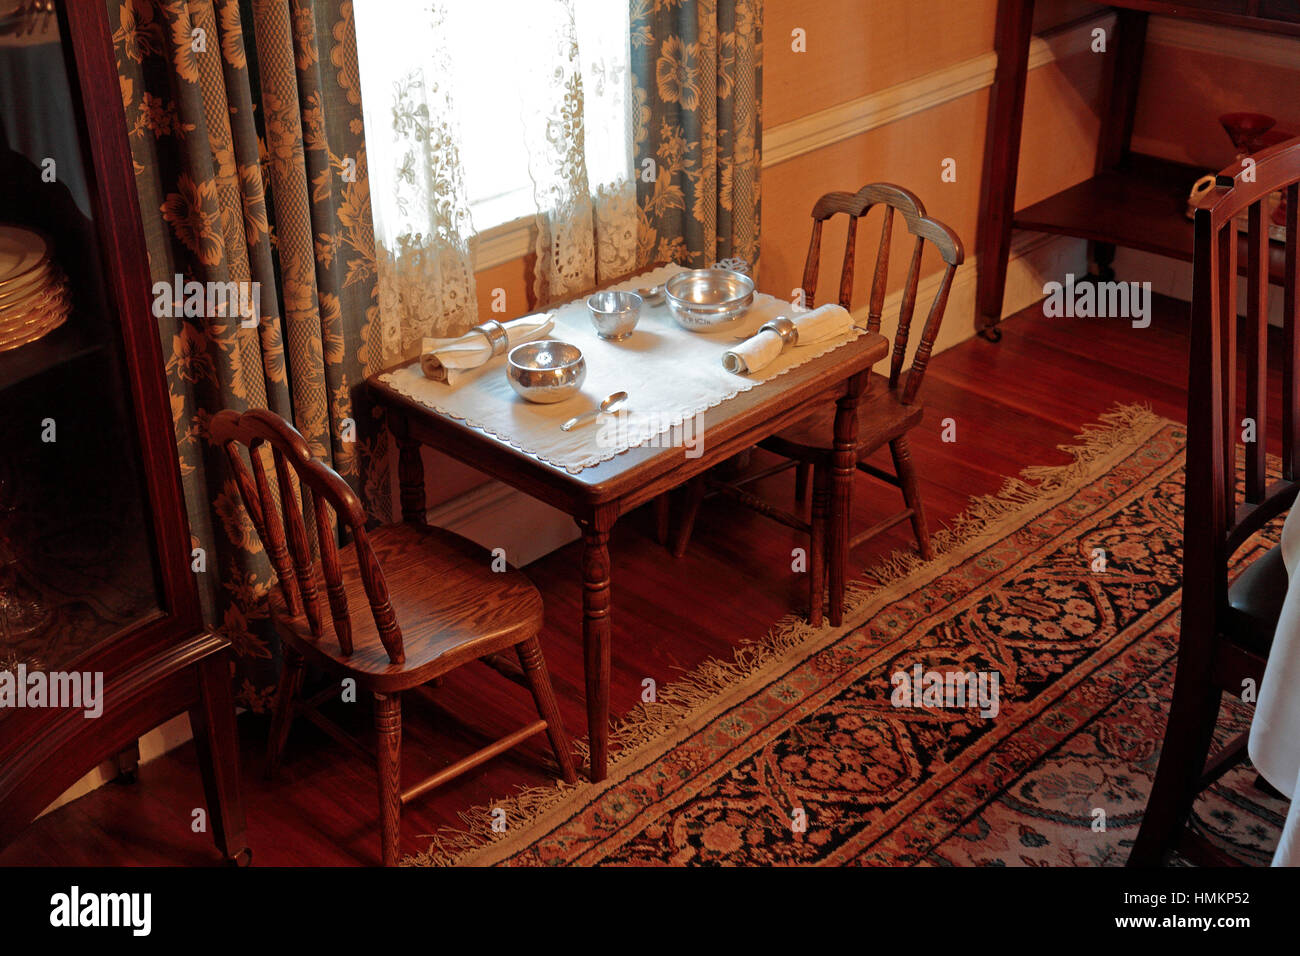 national dining room day